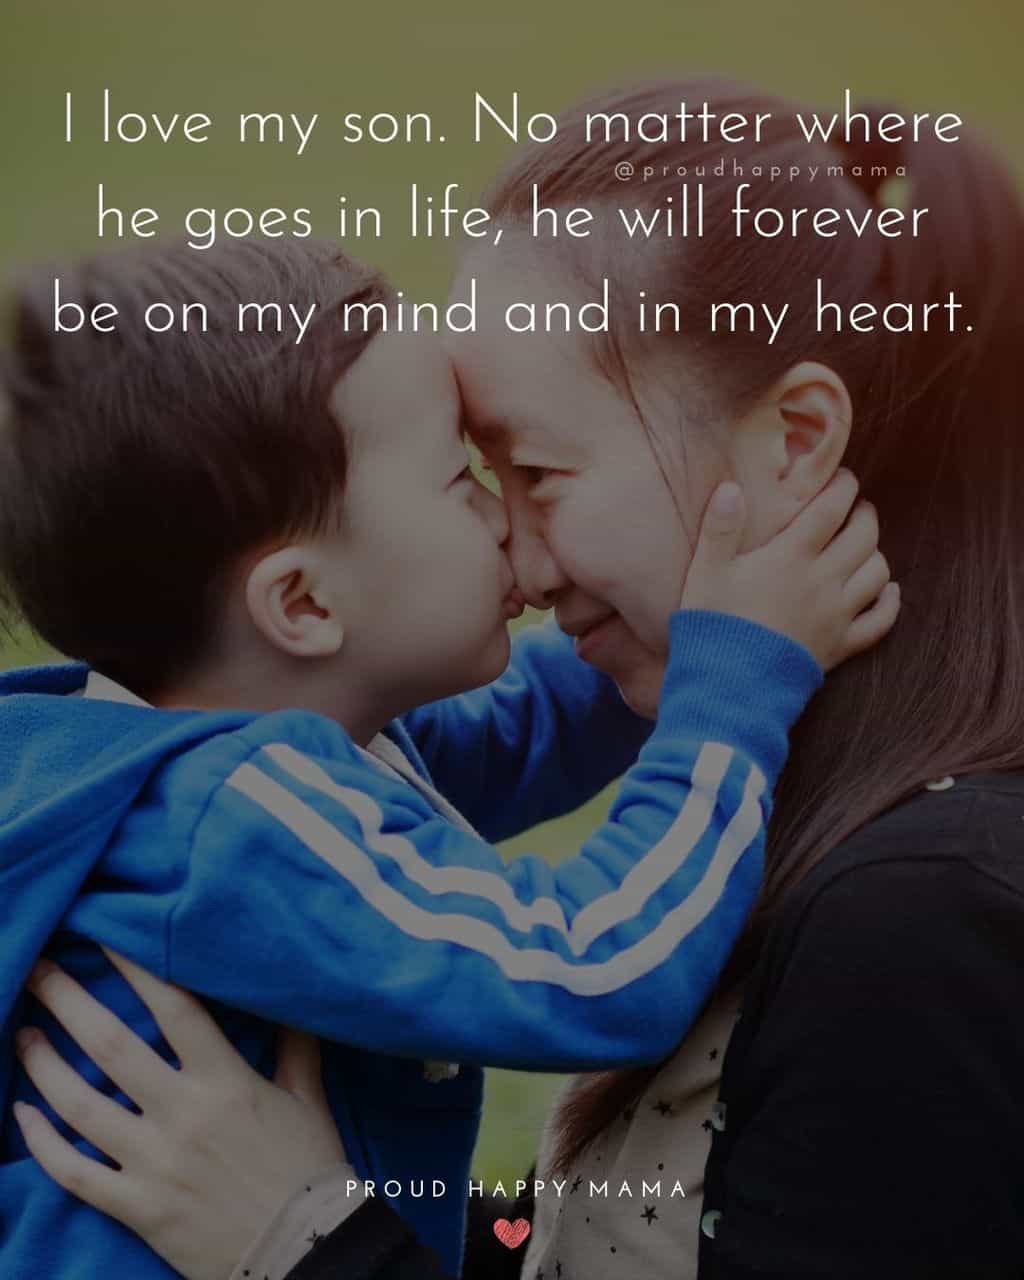 Son Quotes - I love my son. No matter where he goes in life, he will forever be on my mind and in my heart.’